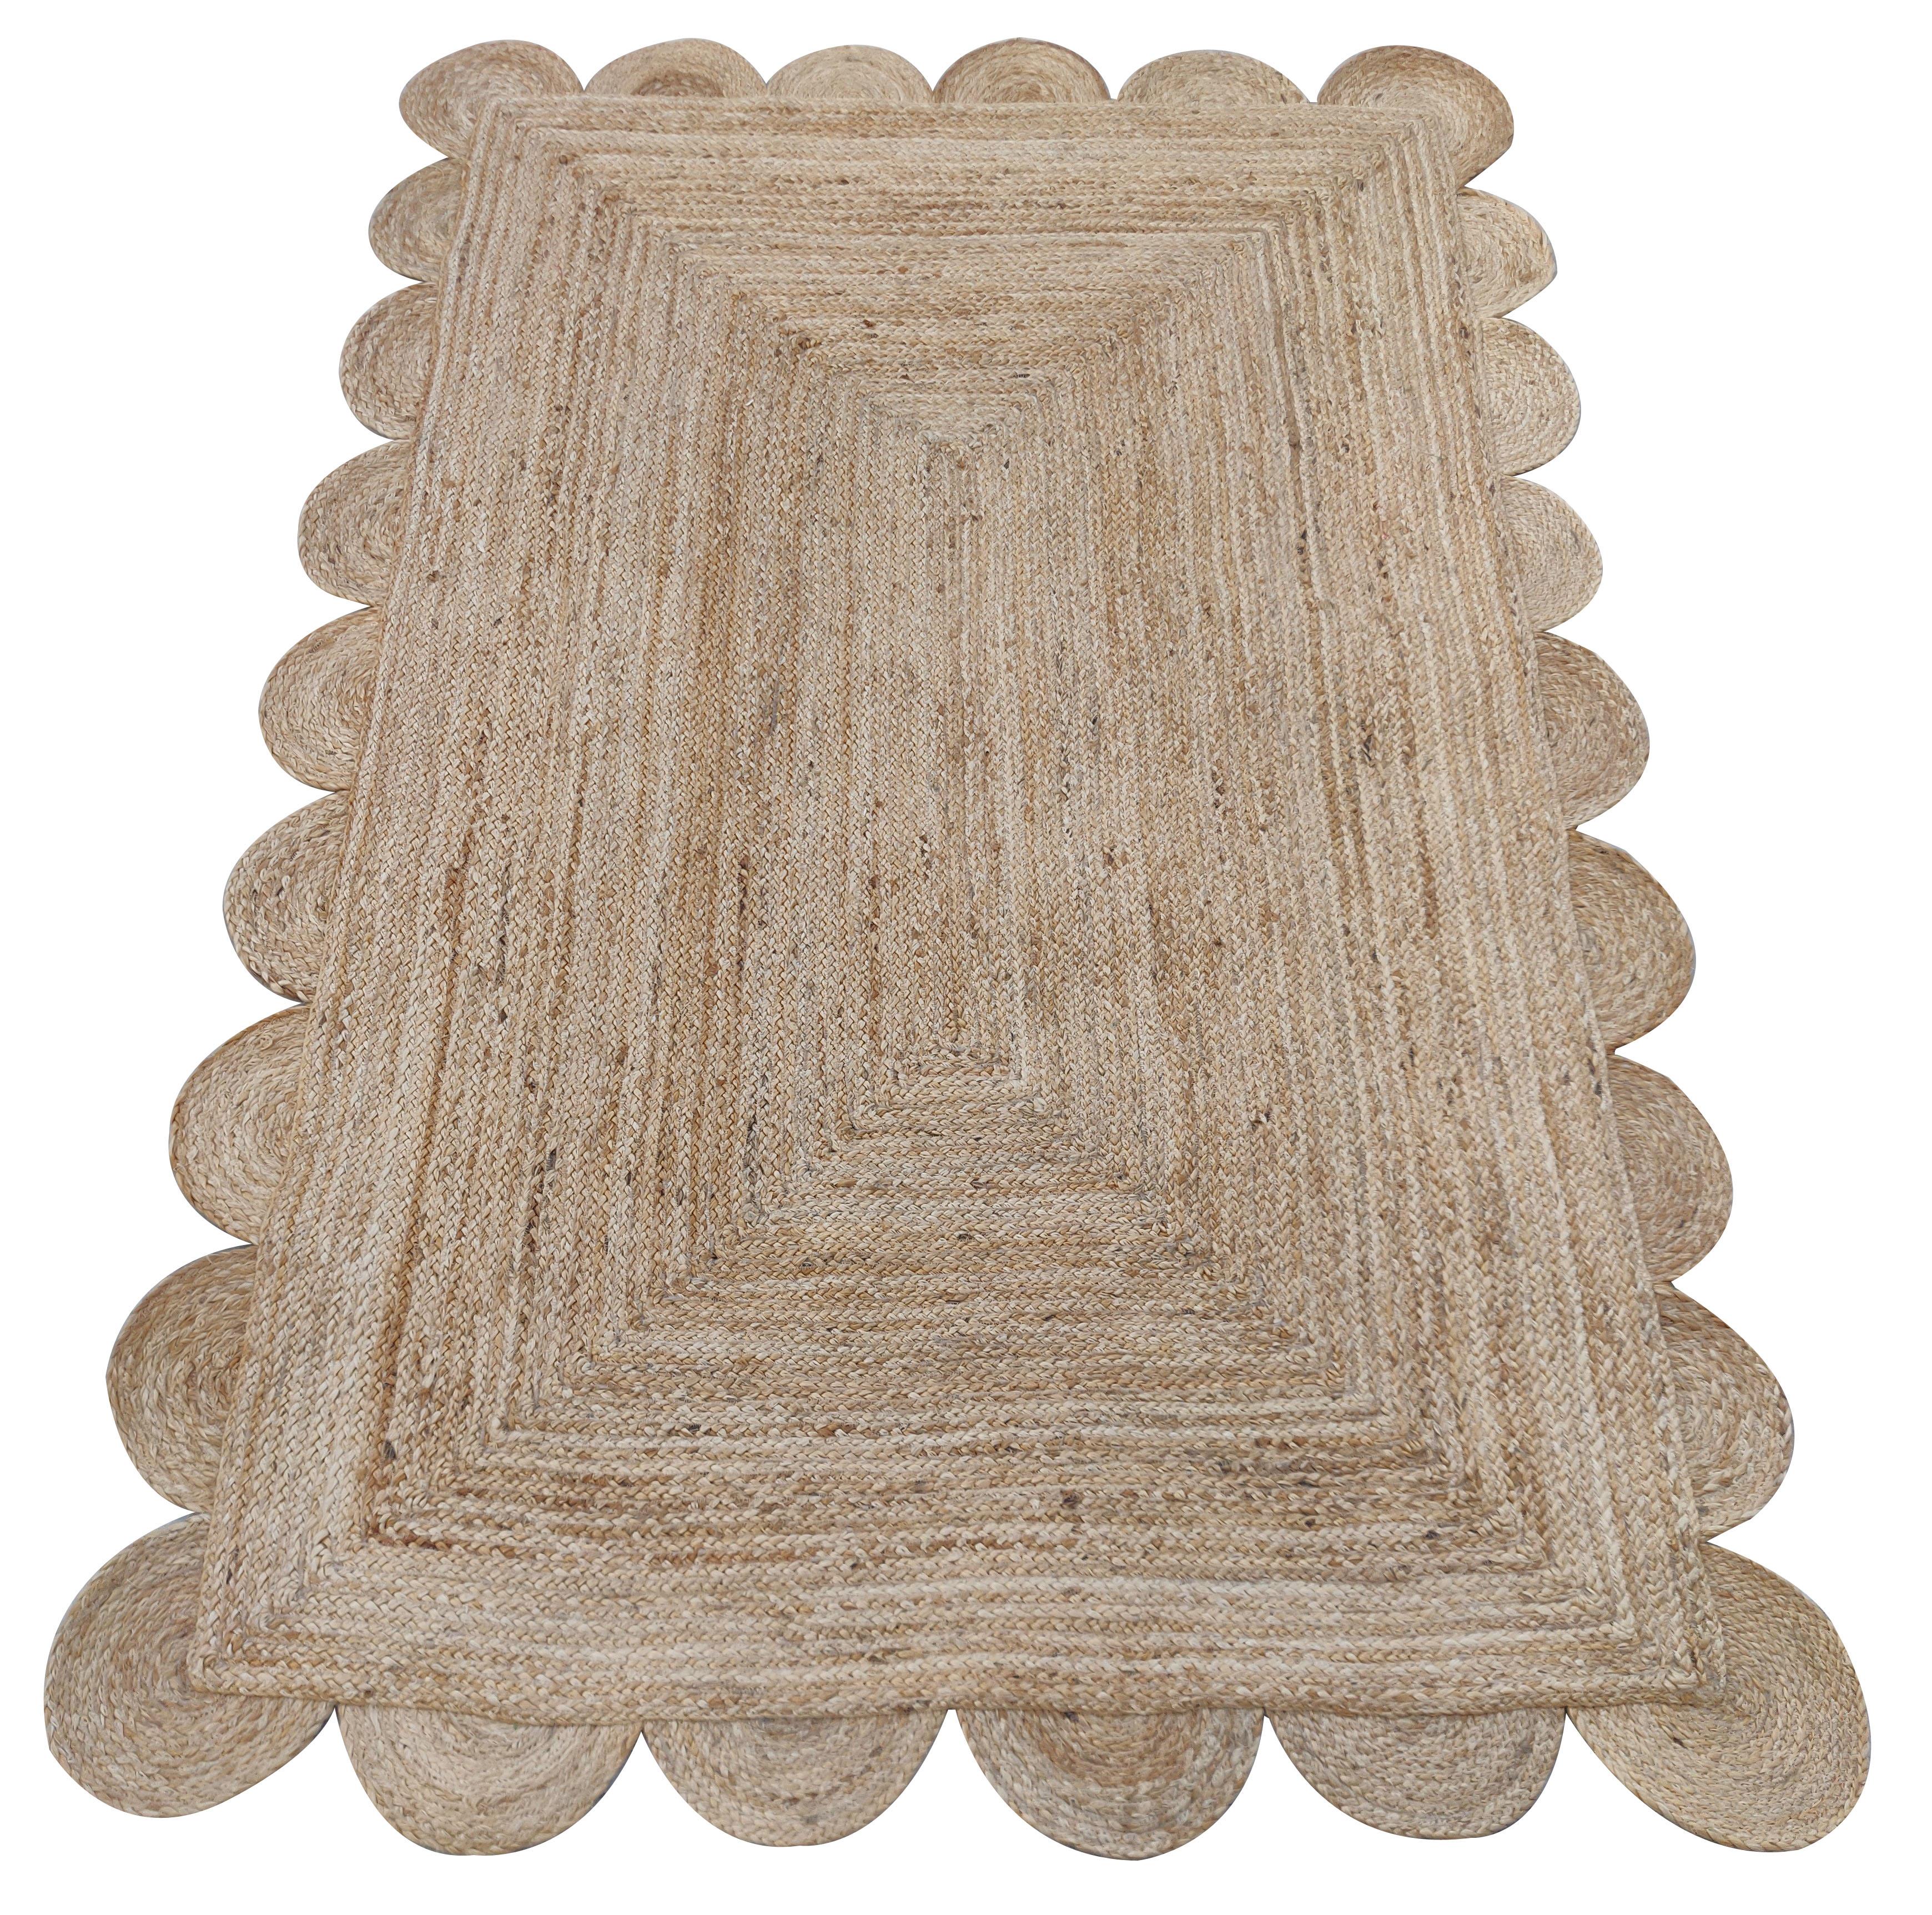 Mid-Century Modern Handmade Jute Area Flat Weave Rug, 4x6 Solid Jute Scalloped Indian Dhurrie Rug For Sale